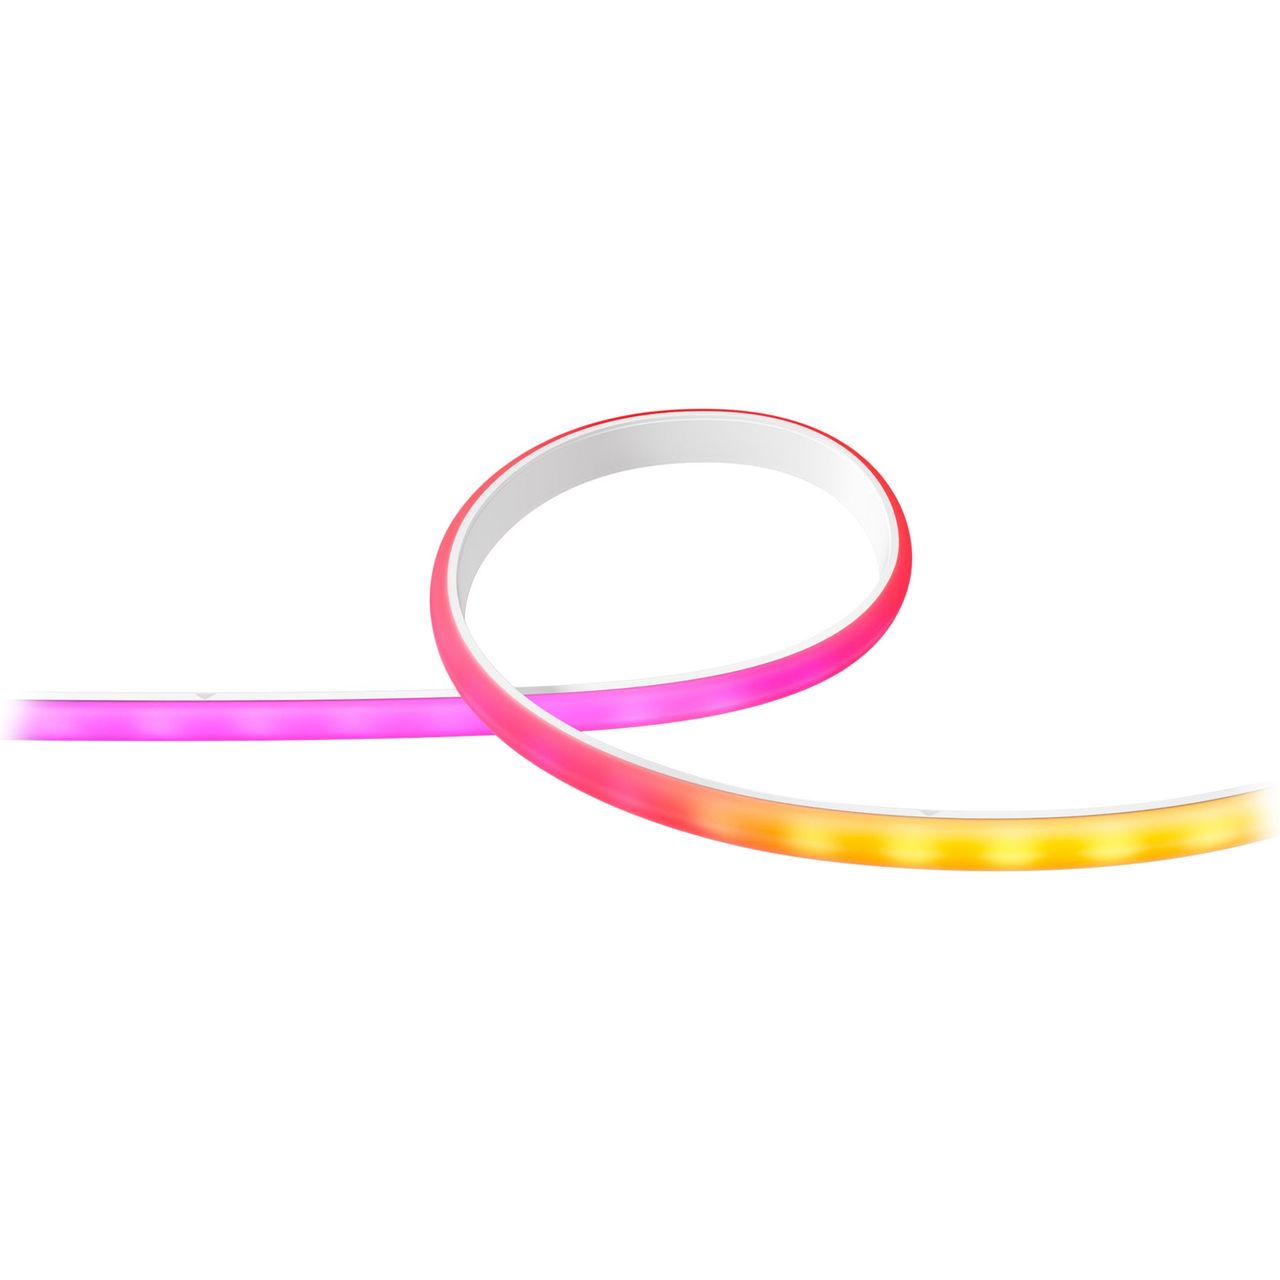 PHILIPS Gradient Hue Smart LED lightstrip 2M White and Color